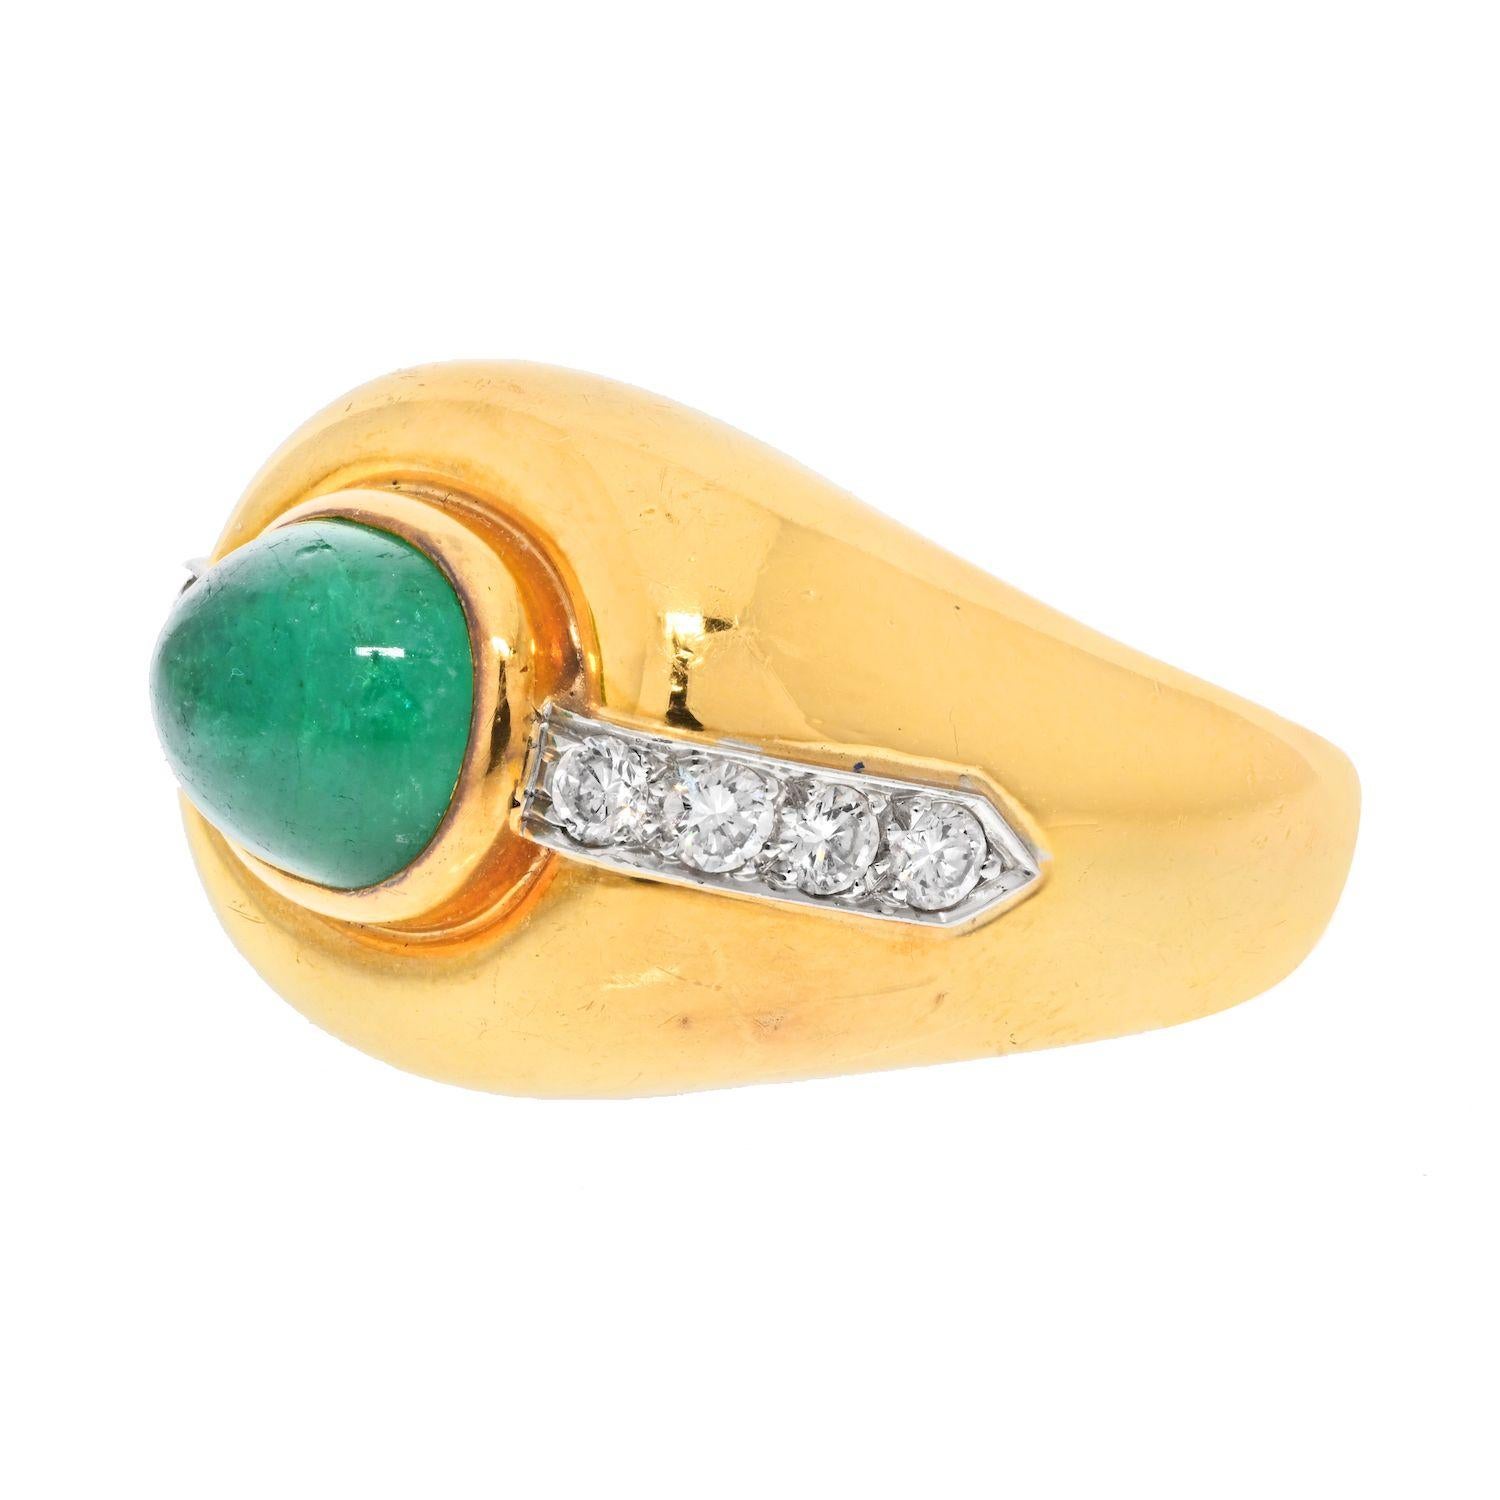 Wearing a mens ring can be a great way to add a touch of style and sophistication to any outfit. To wear this estate David Webb green emerald ring in style, consider the size of the ring, the metal it is made from. and the color of the center stone.